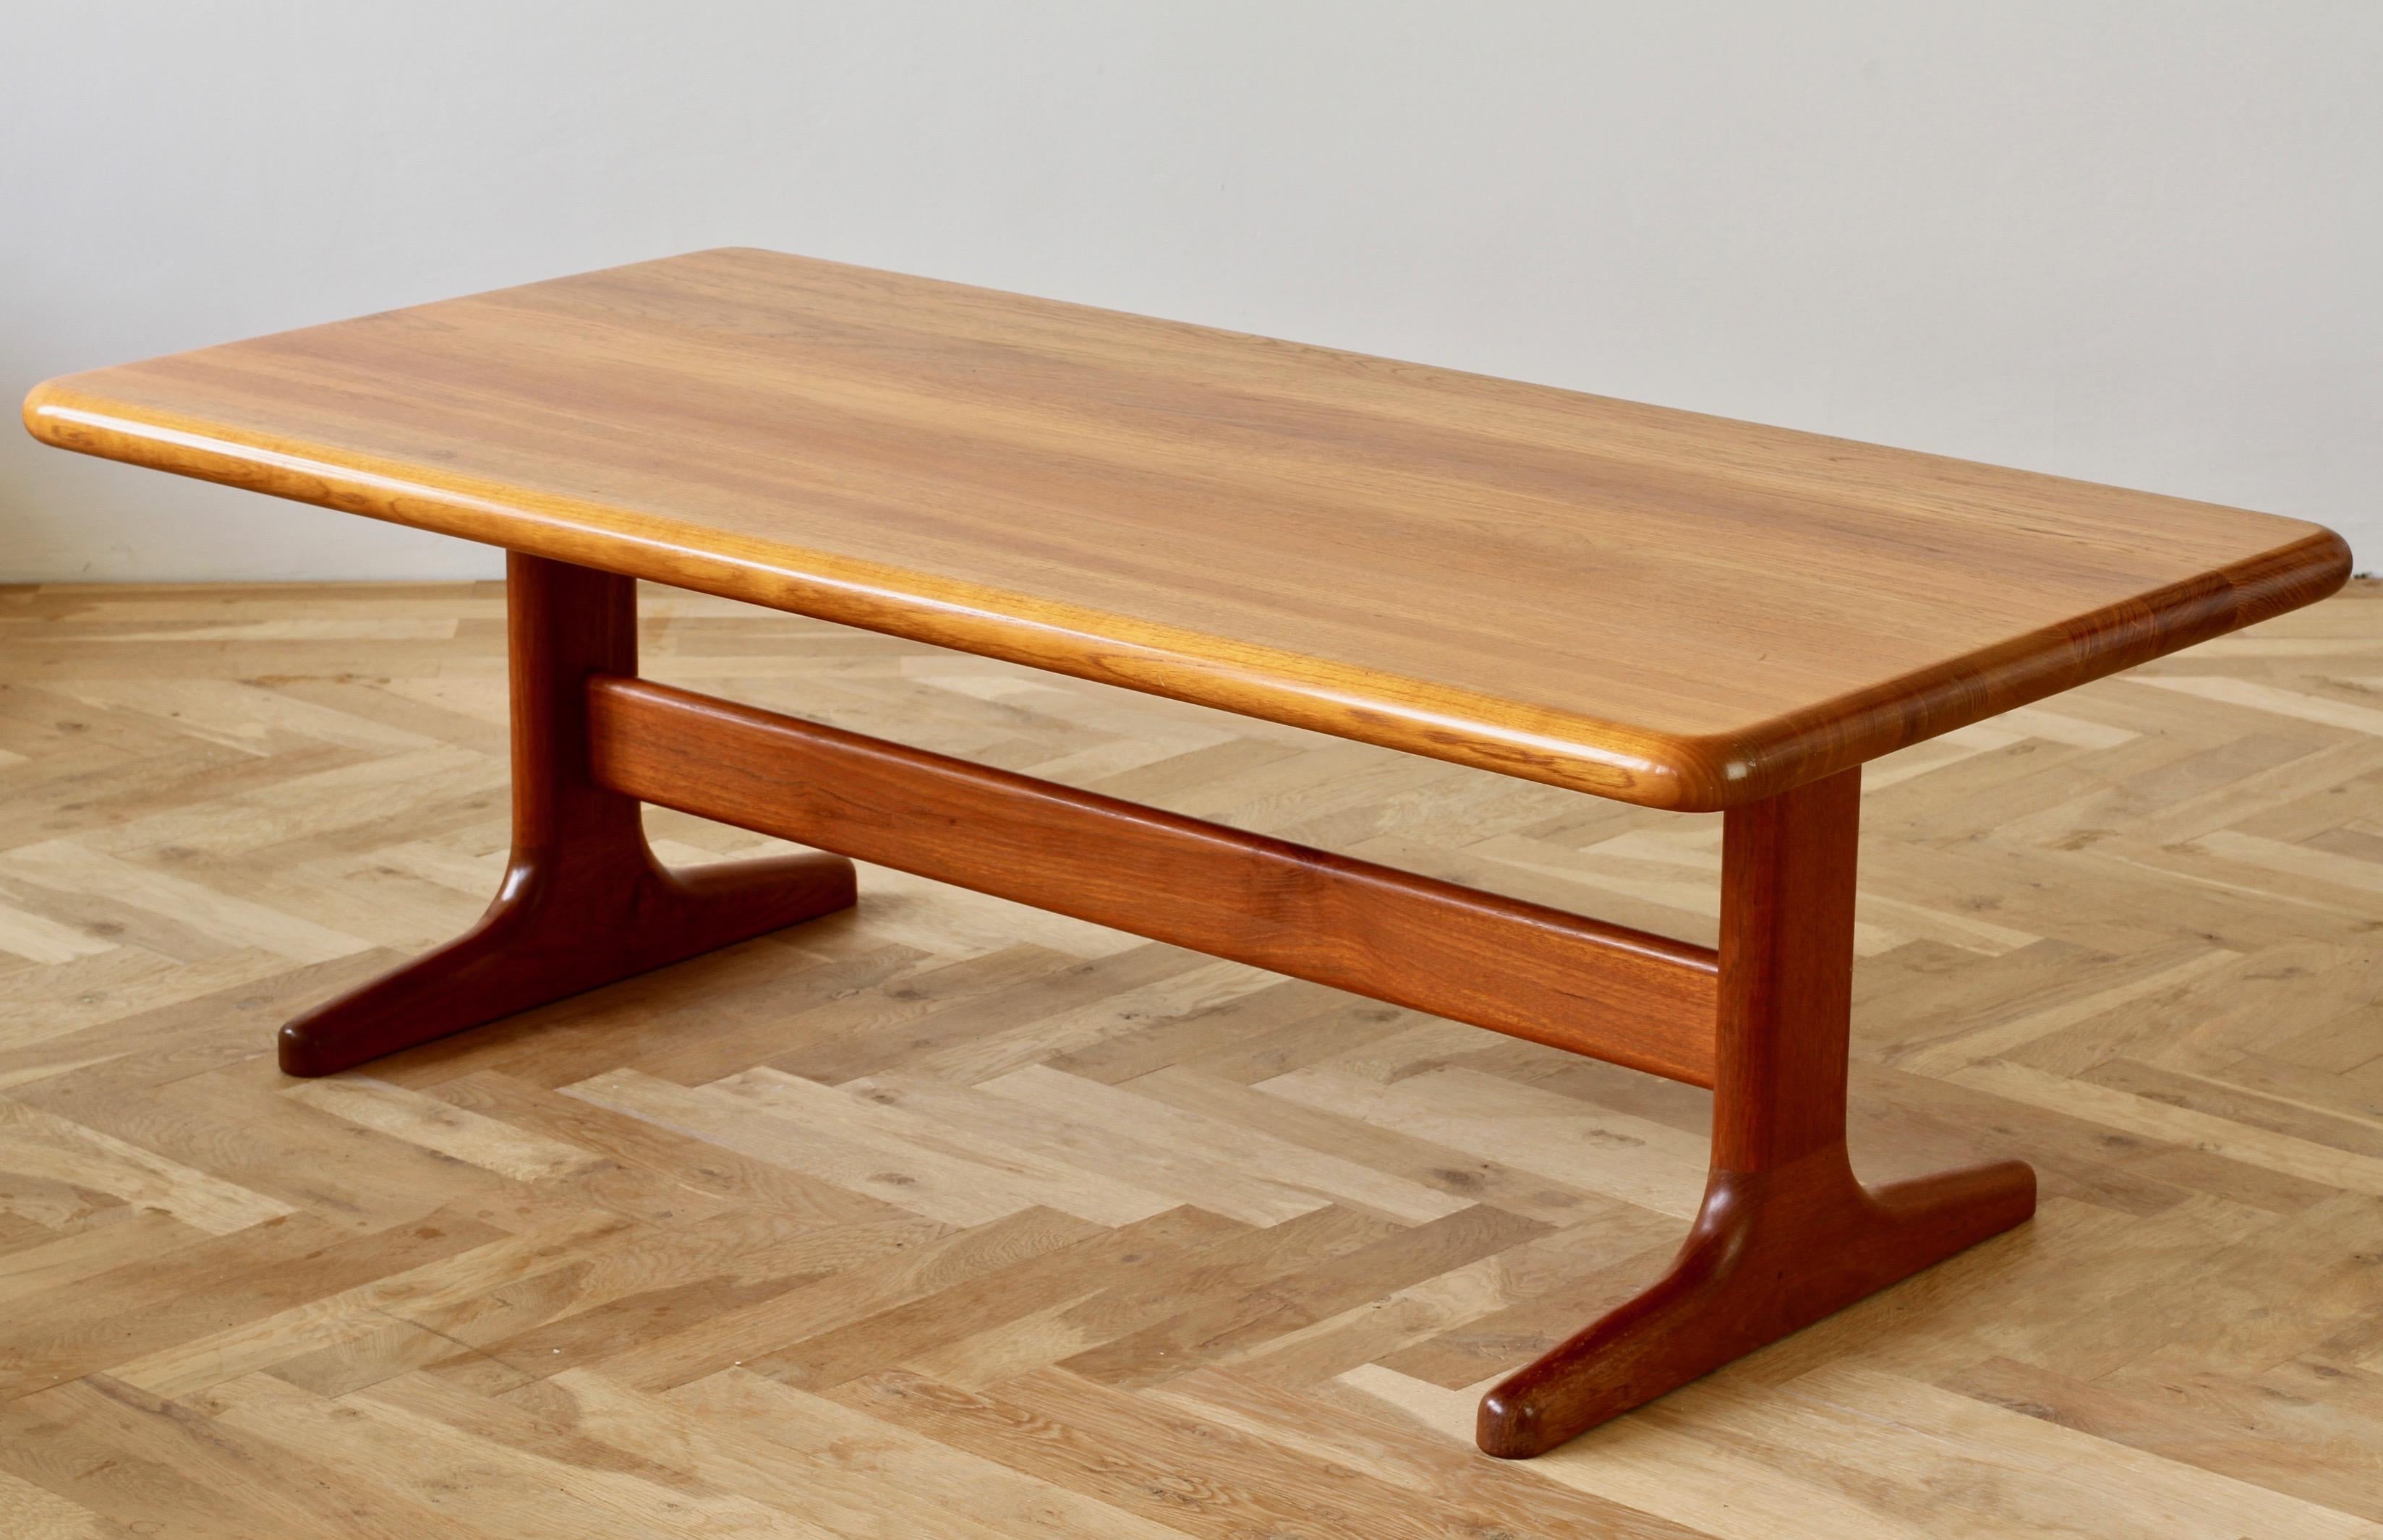 Vintage midcentury large rectangular long coffee or center table by Glostrup Møbelfabrik, made in Denmark, circa 1965. This beautifully constructed solid teak table features solid wooden flat legs and a curved wooden tabletop edge. Perfect for any